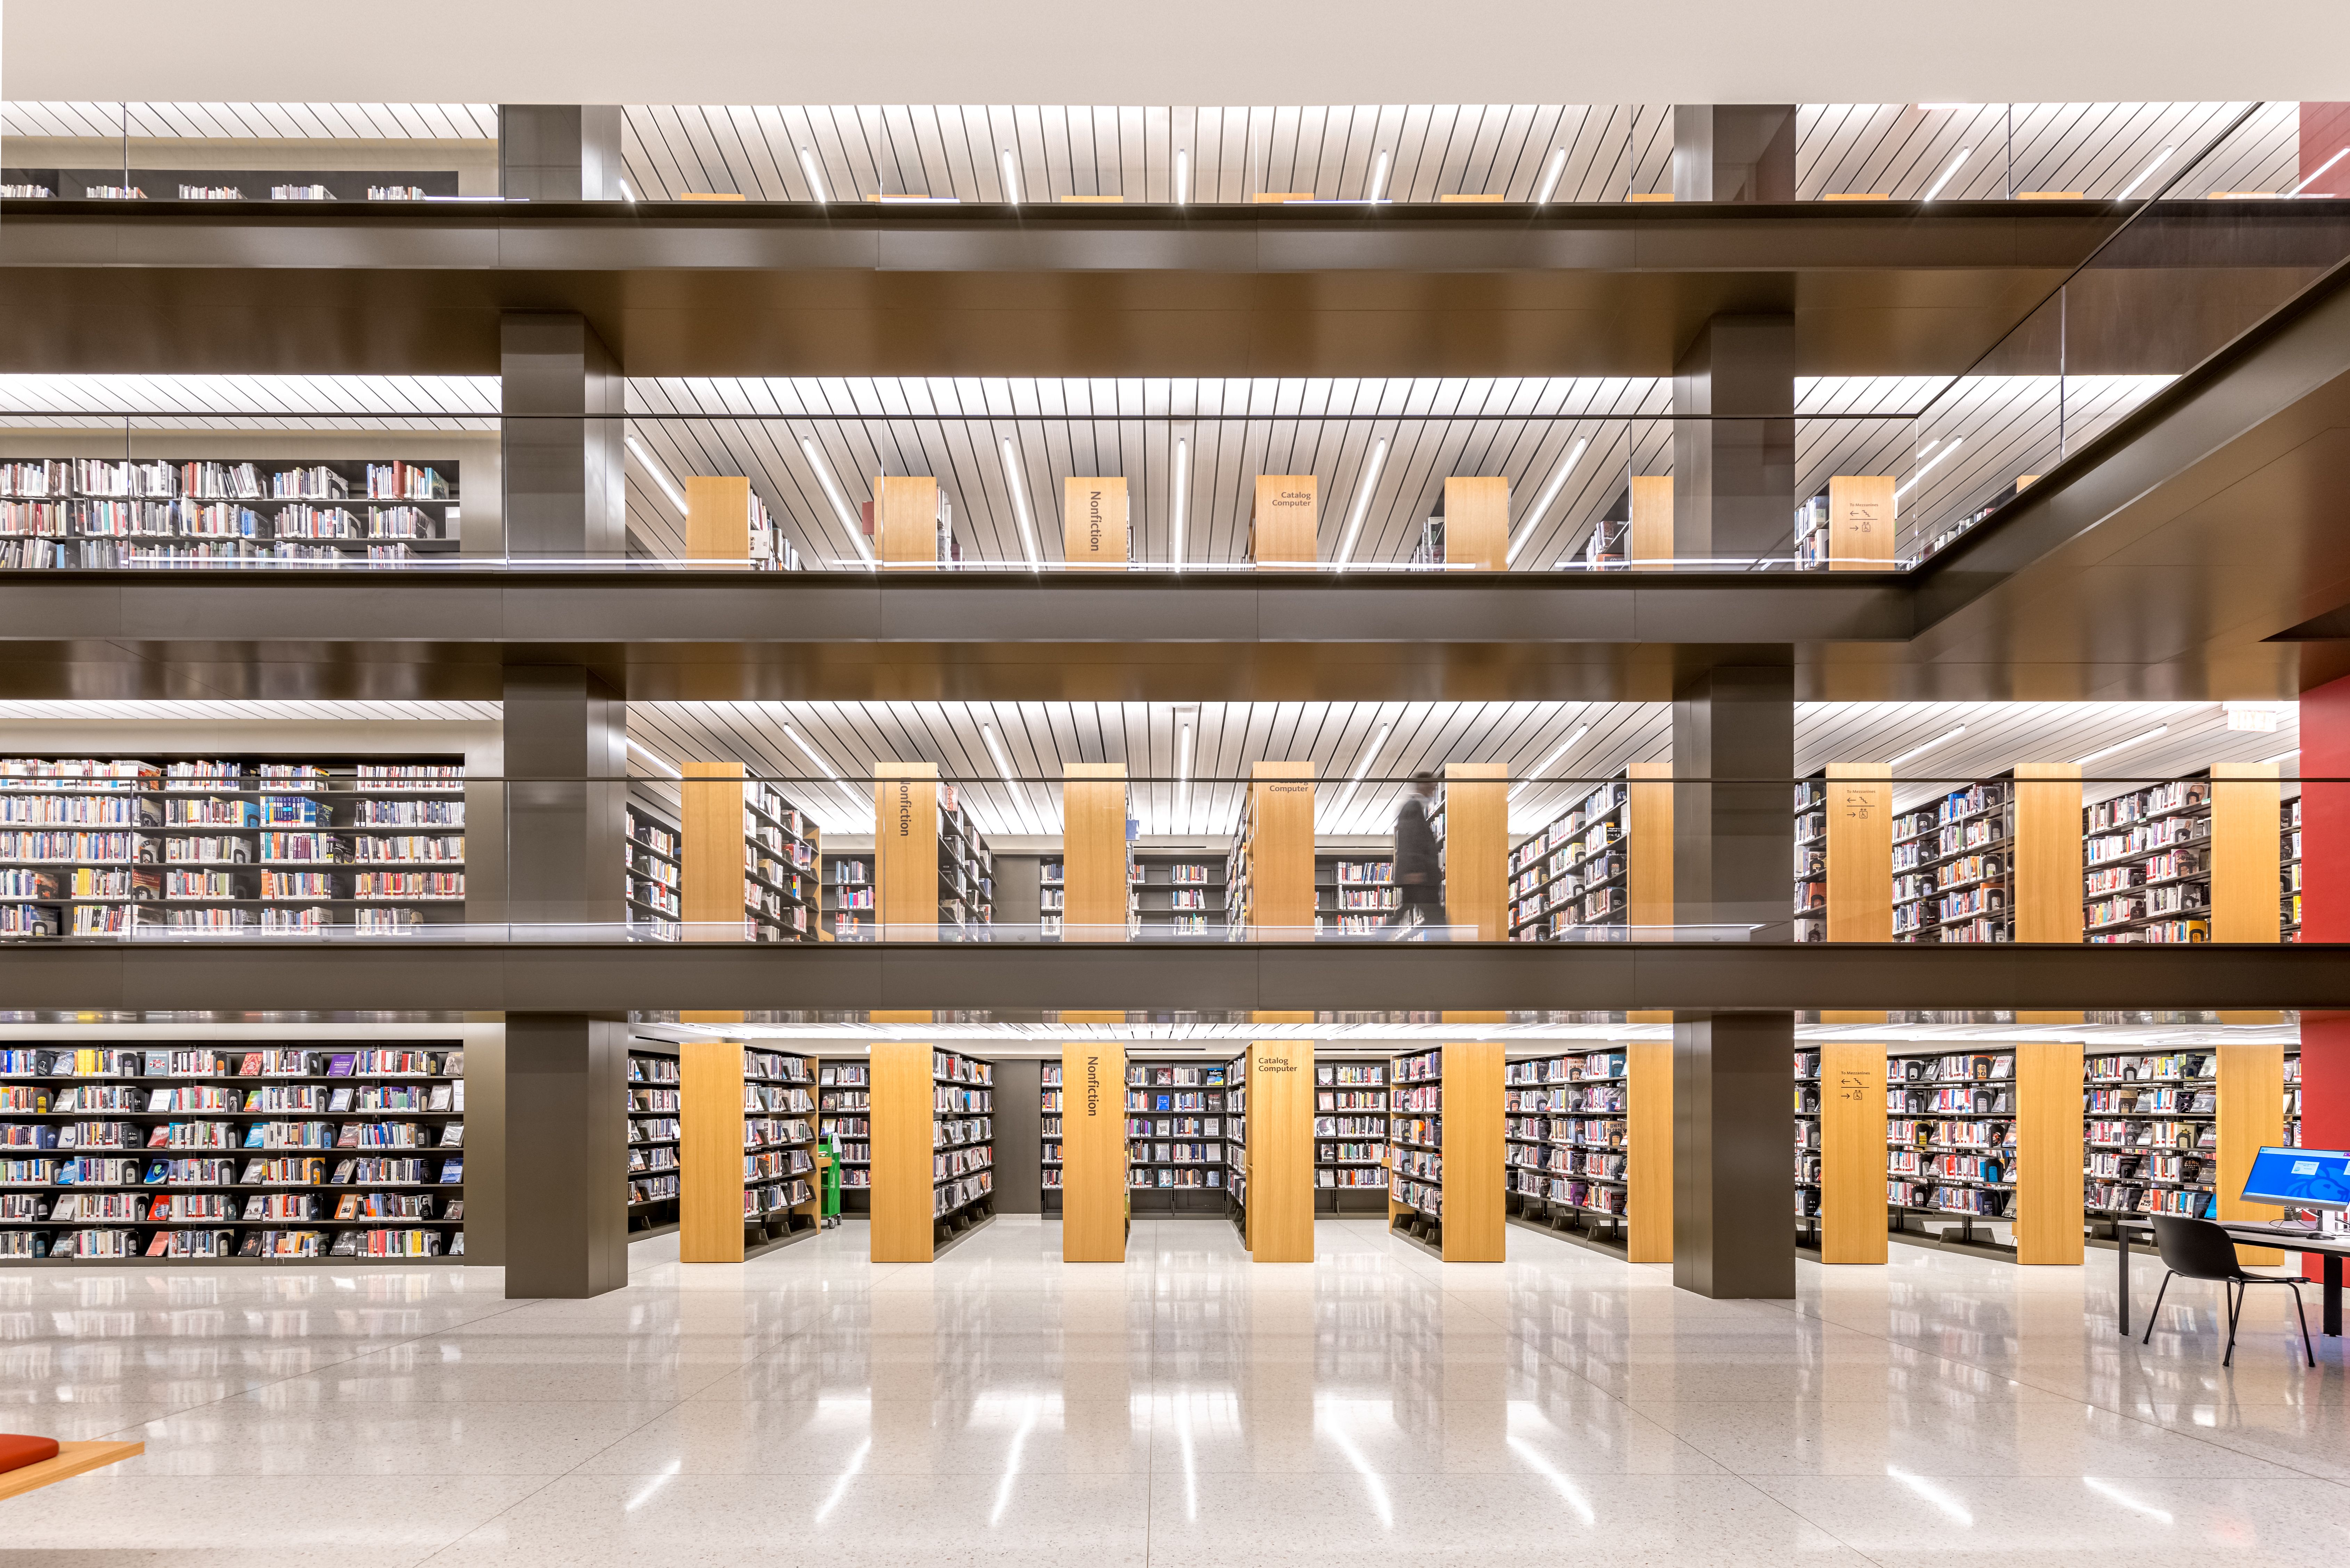 Library architecture and design: a worldwide guide. Wallpaper*